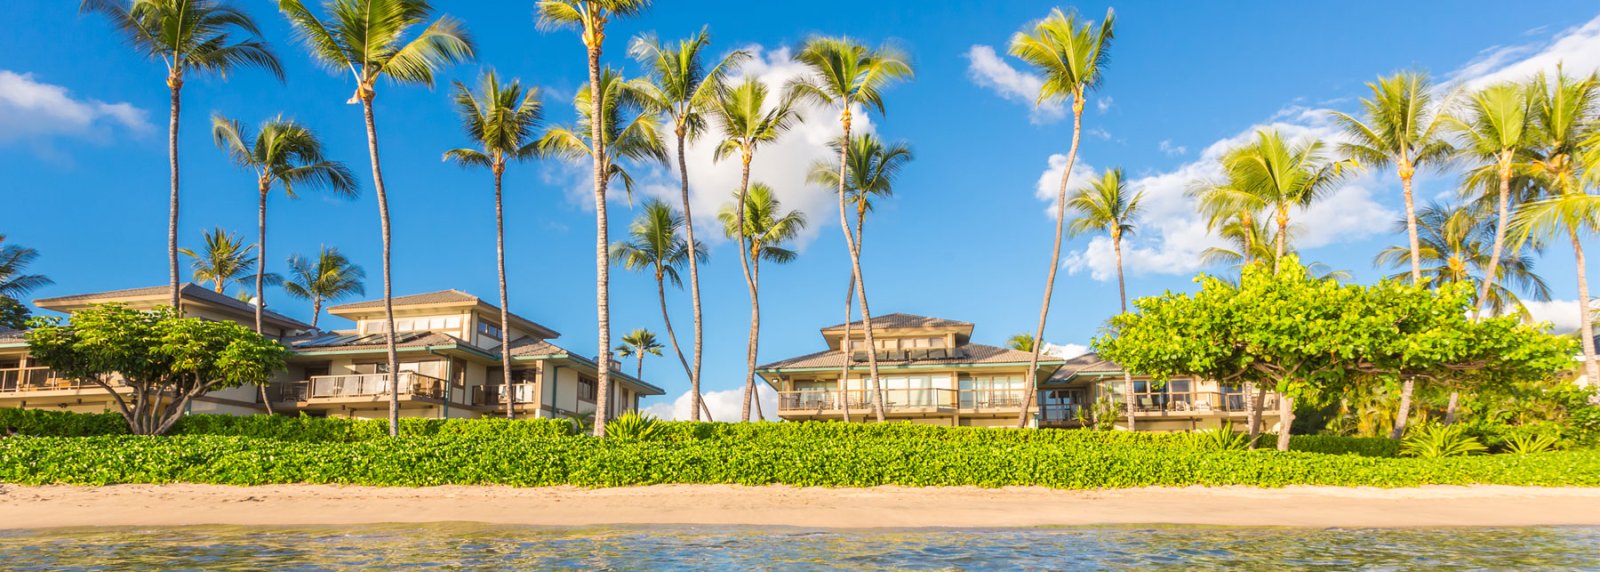 Maui has lovely accommodations for every vacation budget